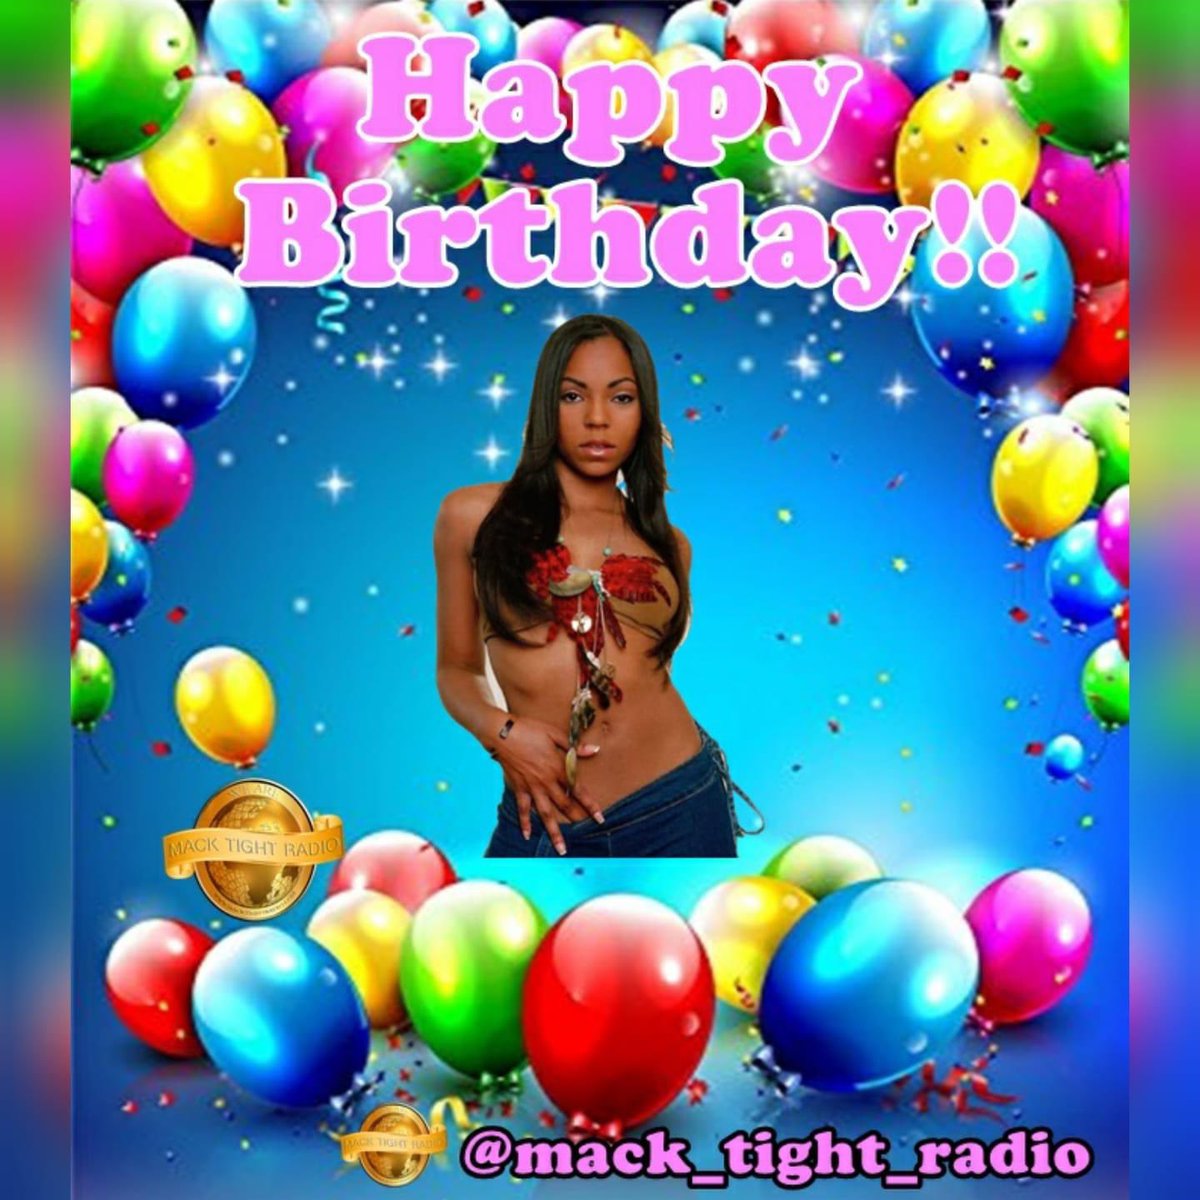 #HappyBirthday 🍾🍷🍷🎂 To #Ashanti The #Singer ❌ #Songwriter ❌ #Actress Turns 43 Today!! - #MackTightRadio 📻 #MackTightRadioReloaded 🔫 #MackTightEntertainment 👑 #MackTightBirthdays 🎂 #MackTightTV 📺 #MackTightChannel 💧 #MackTightApp #Ready2Learn #Ready2LearnShow